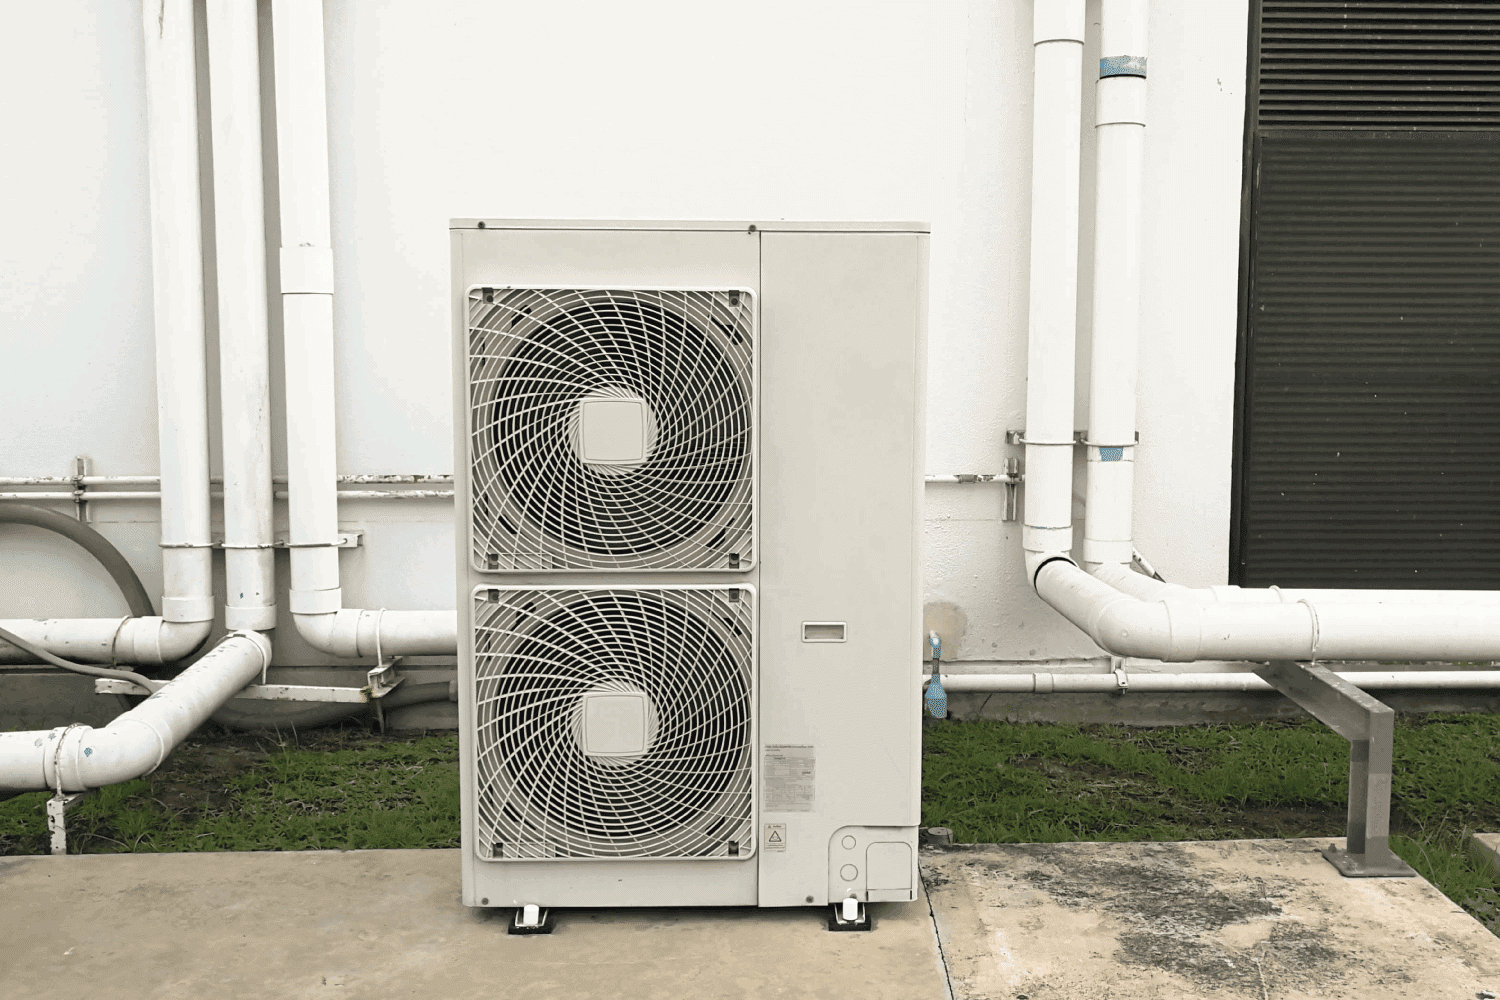 Air conditioning out door,A group of three industrial sized air conditioners along a brick wall